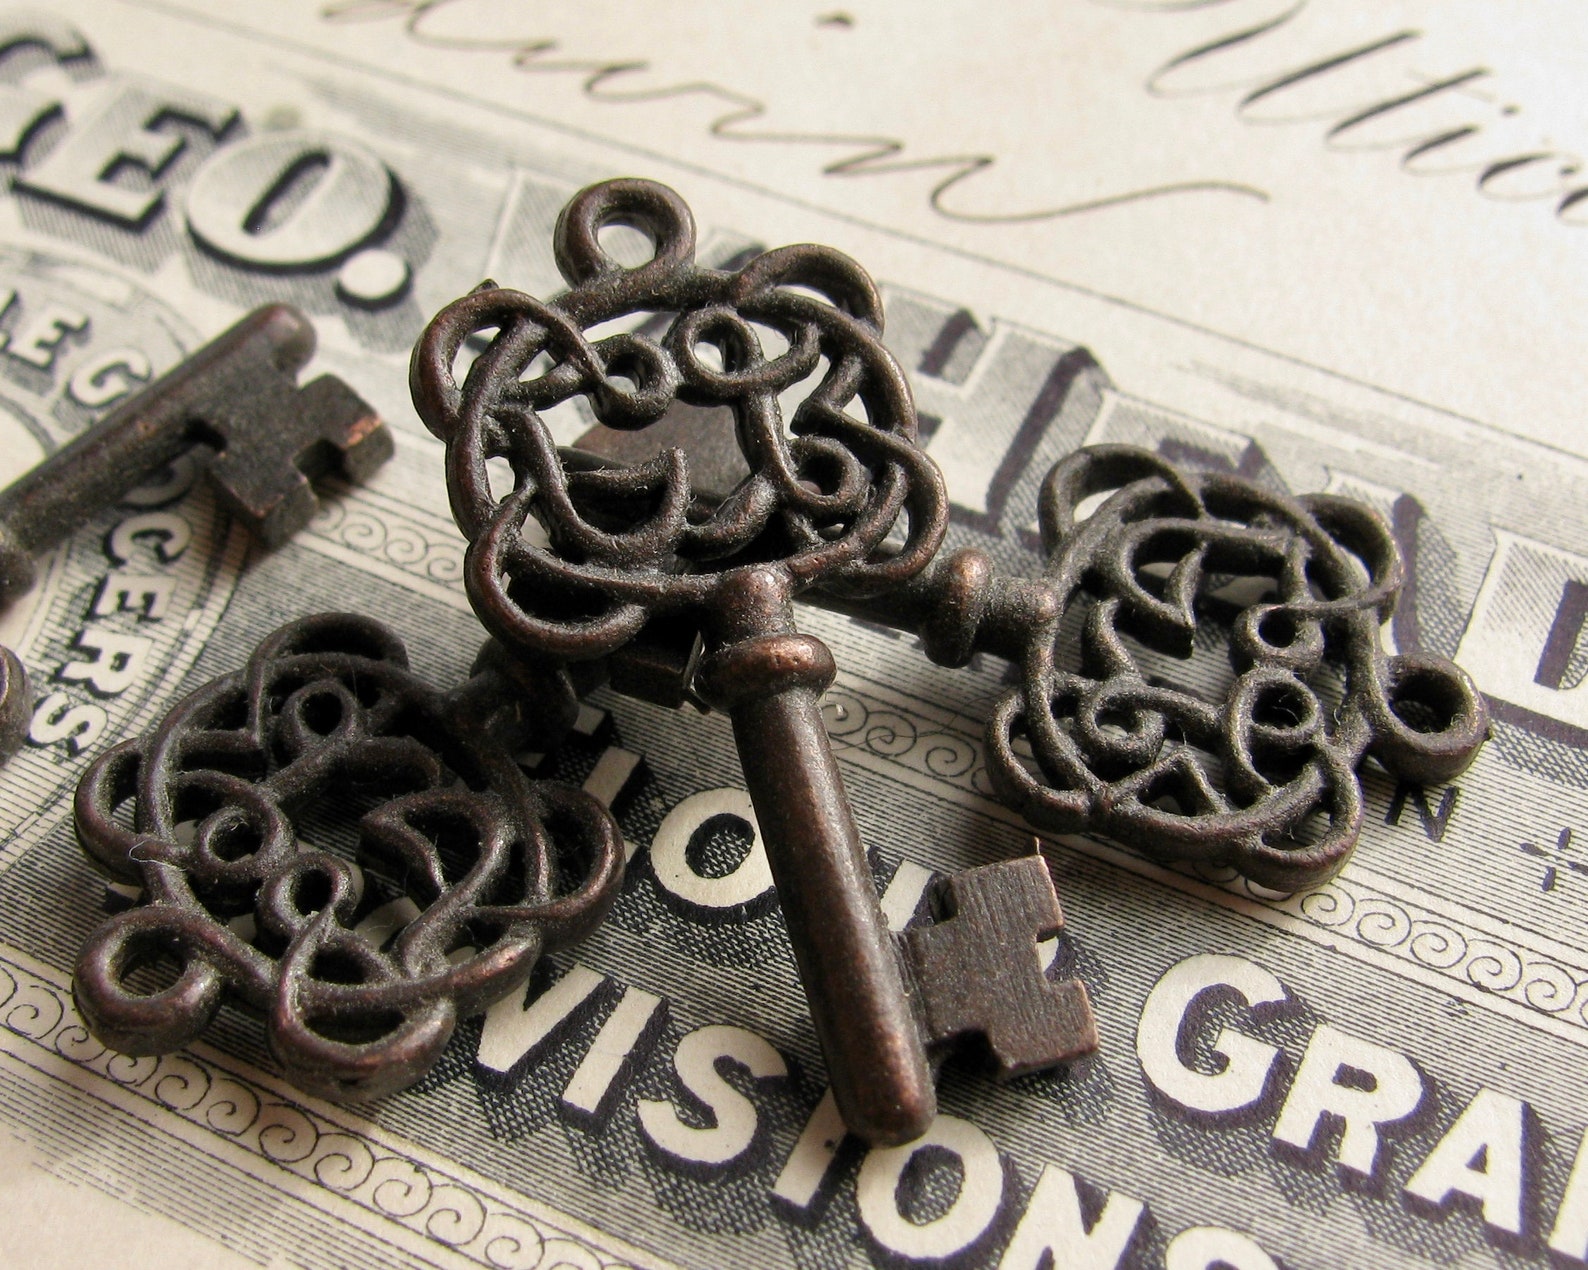 Filigree Jewelry Box Key Charms From Bad Girl Castings Black - Etsy